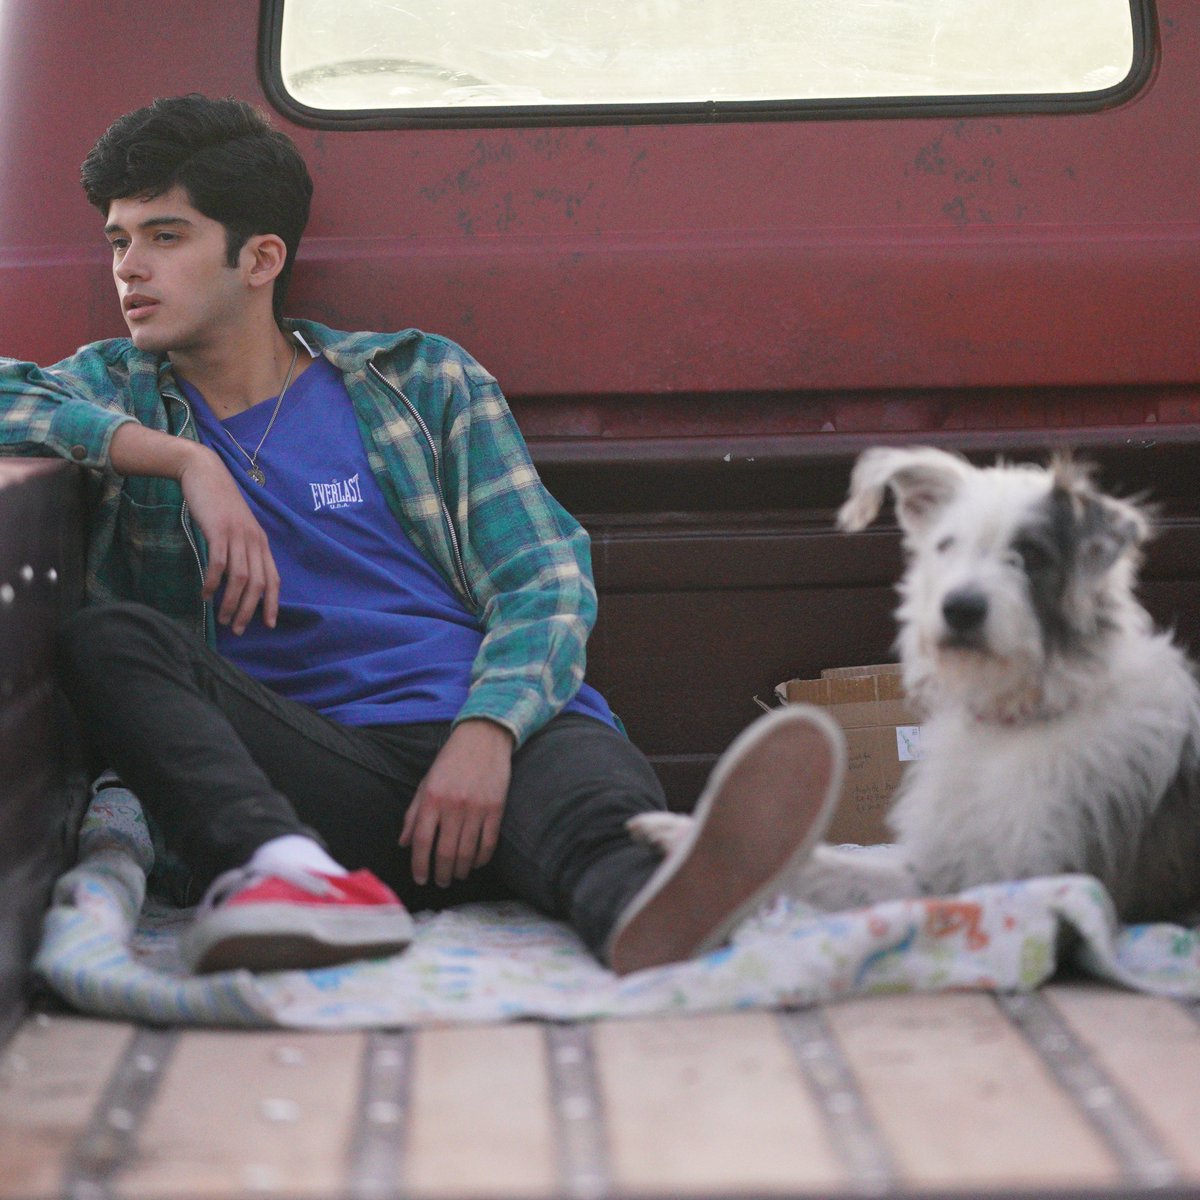 ON THIS SAT, #Melbourne! 🤸🌈 The Victorian premiere of festival darling ARISTOTLE AND DANTE DISCOVER THE SECRETS OF THE UNIVERSE is happening this Saturday as part of the @melbqueerfilmfest & @midsummafestival

#LGBTQI #midsumma #MQFF